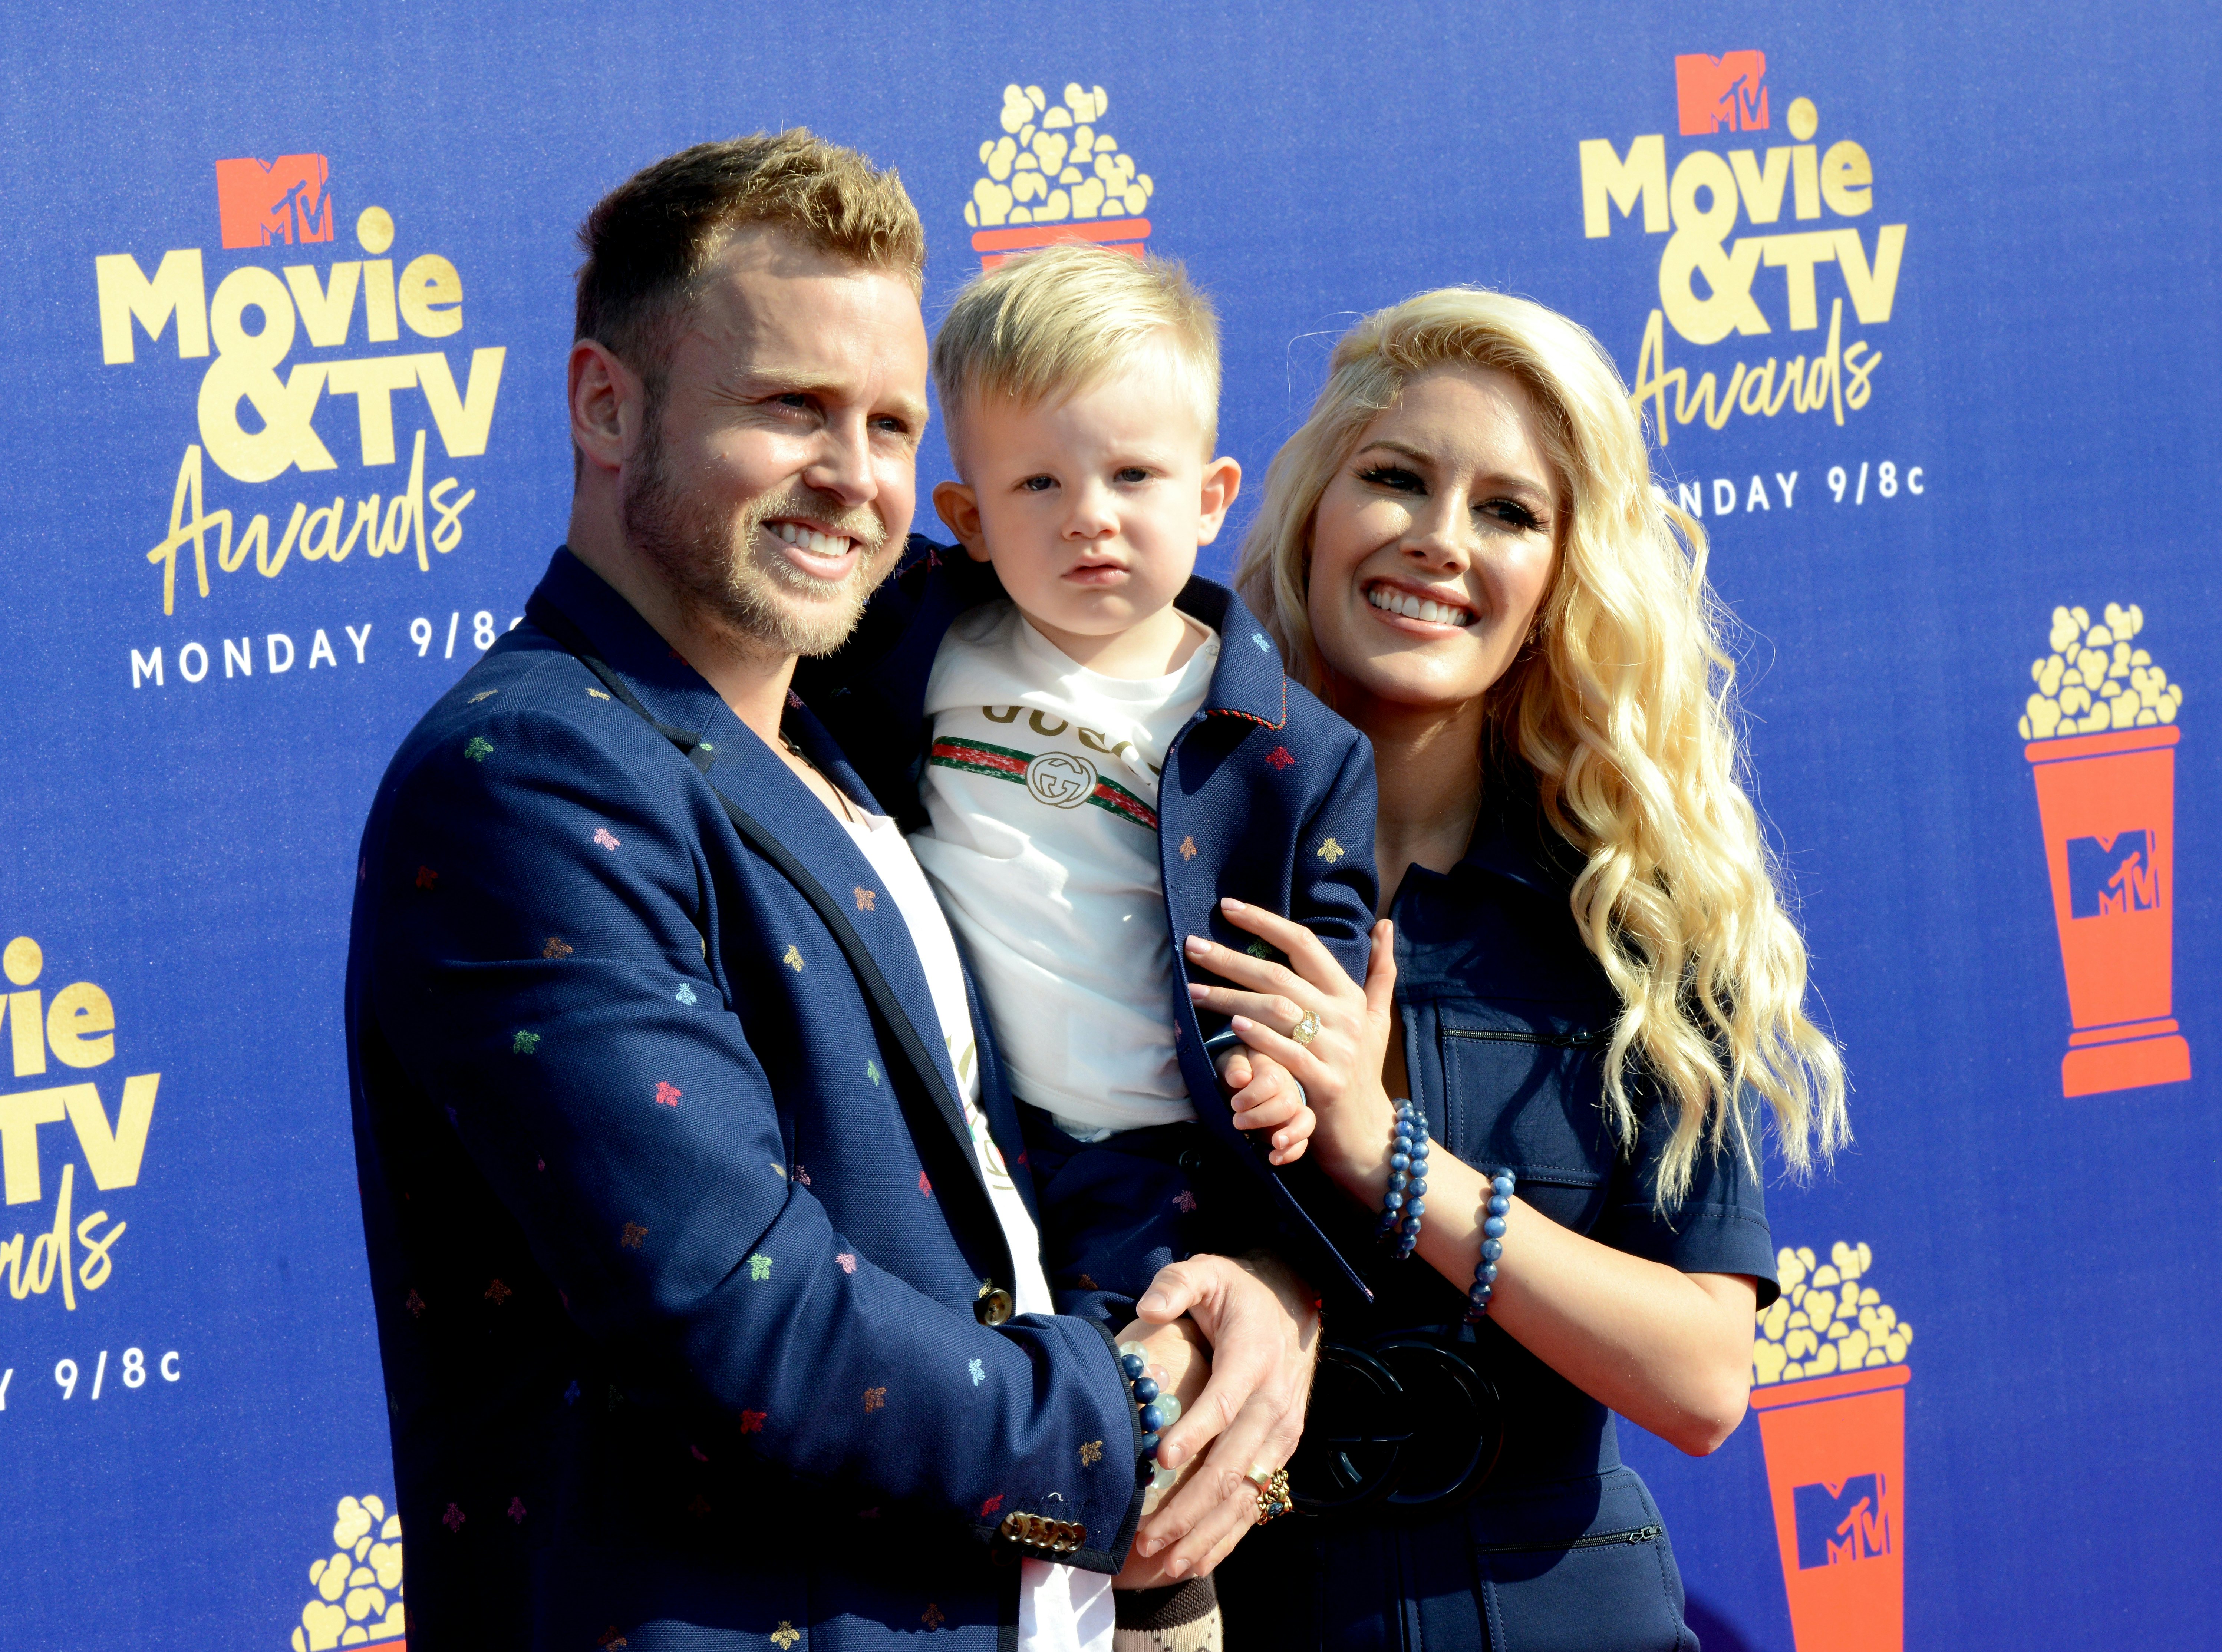 The Hills' Stars Heidi Montag And Spencer Pratt Welcome Second Child